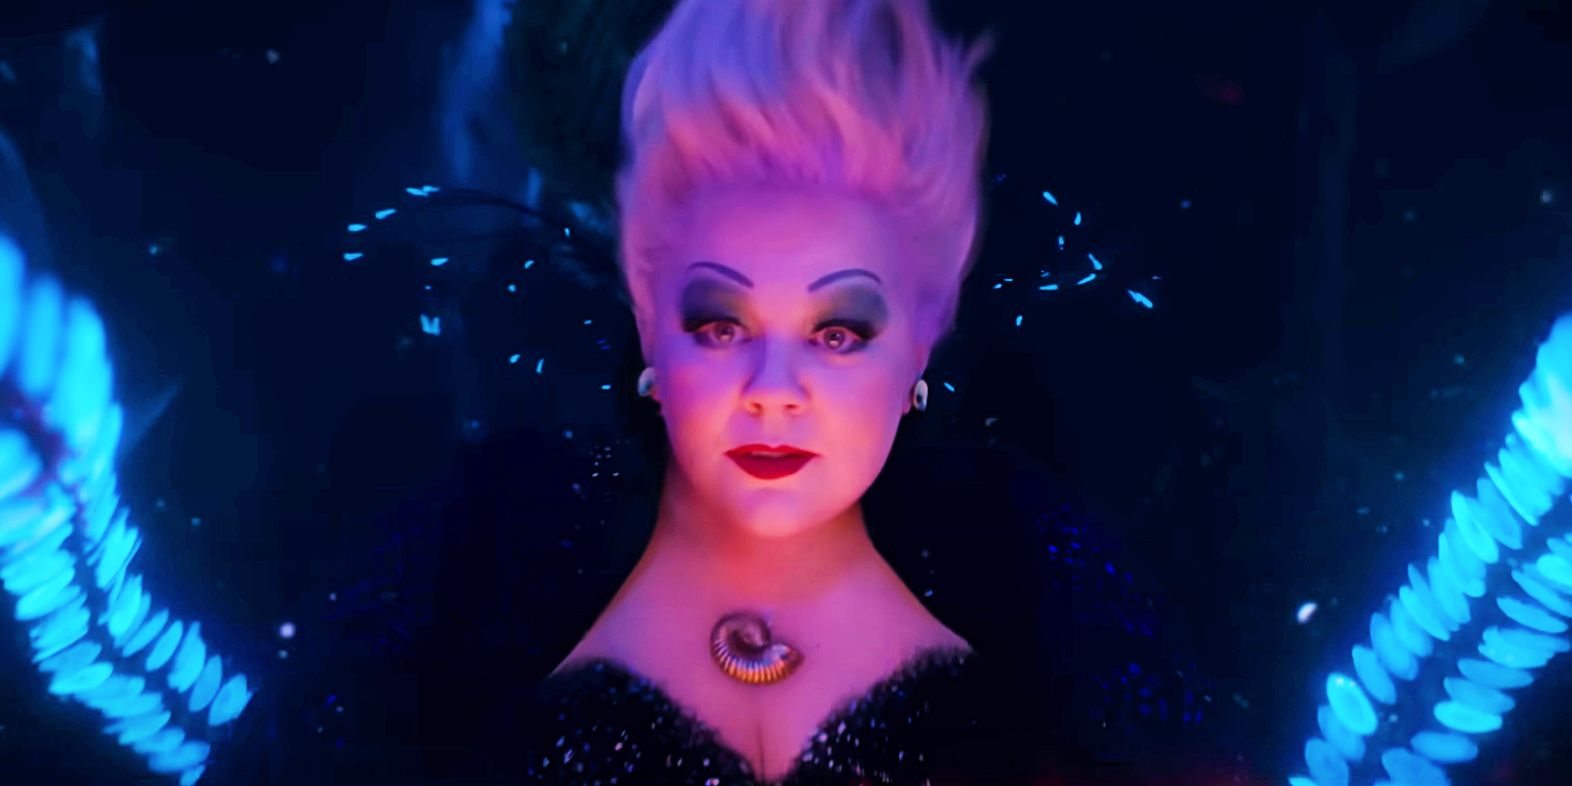 Little Mermaid Ursula Cosplay Terrifyingly Brings The Character To Life